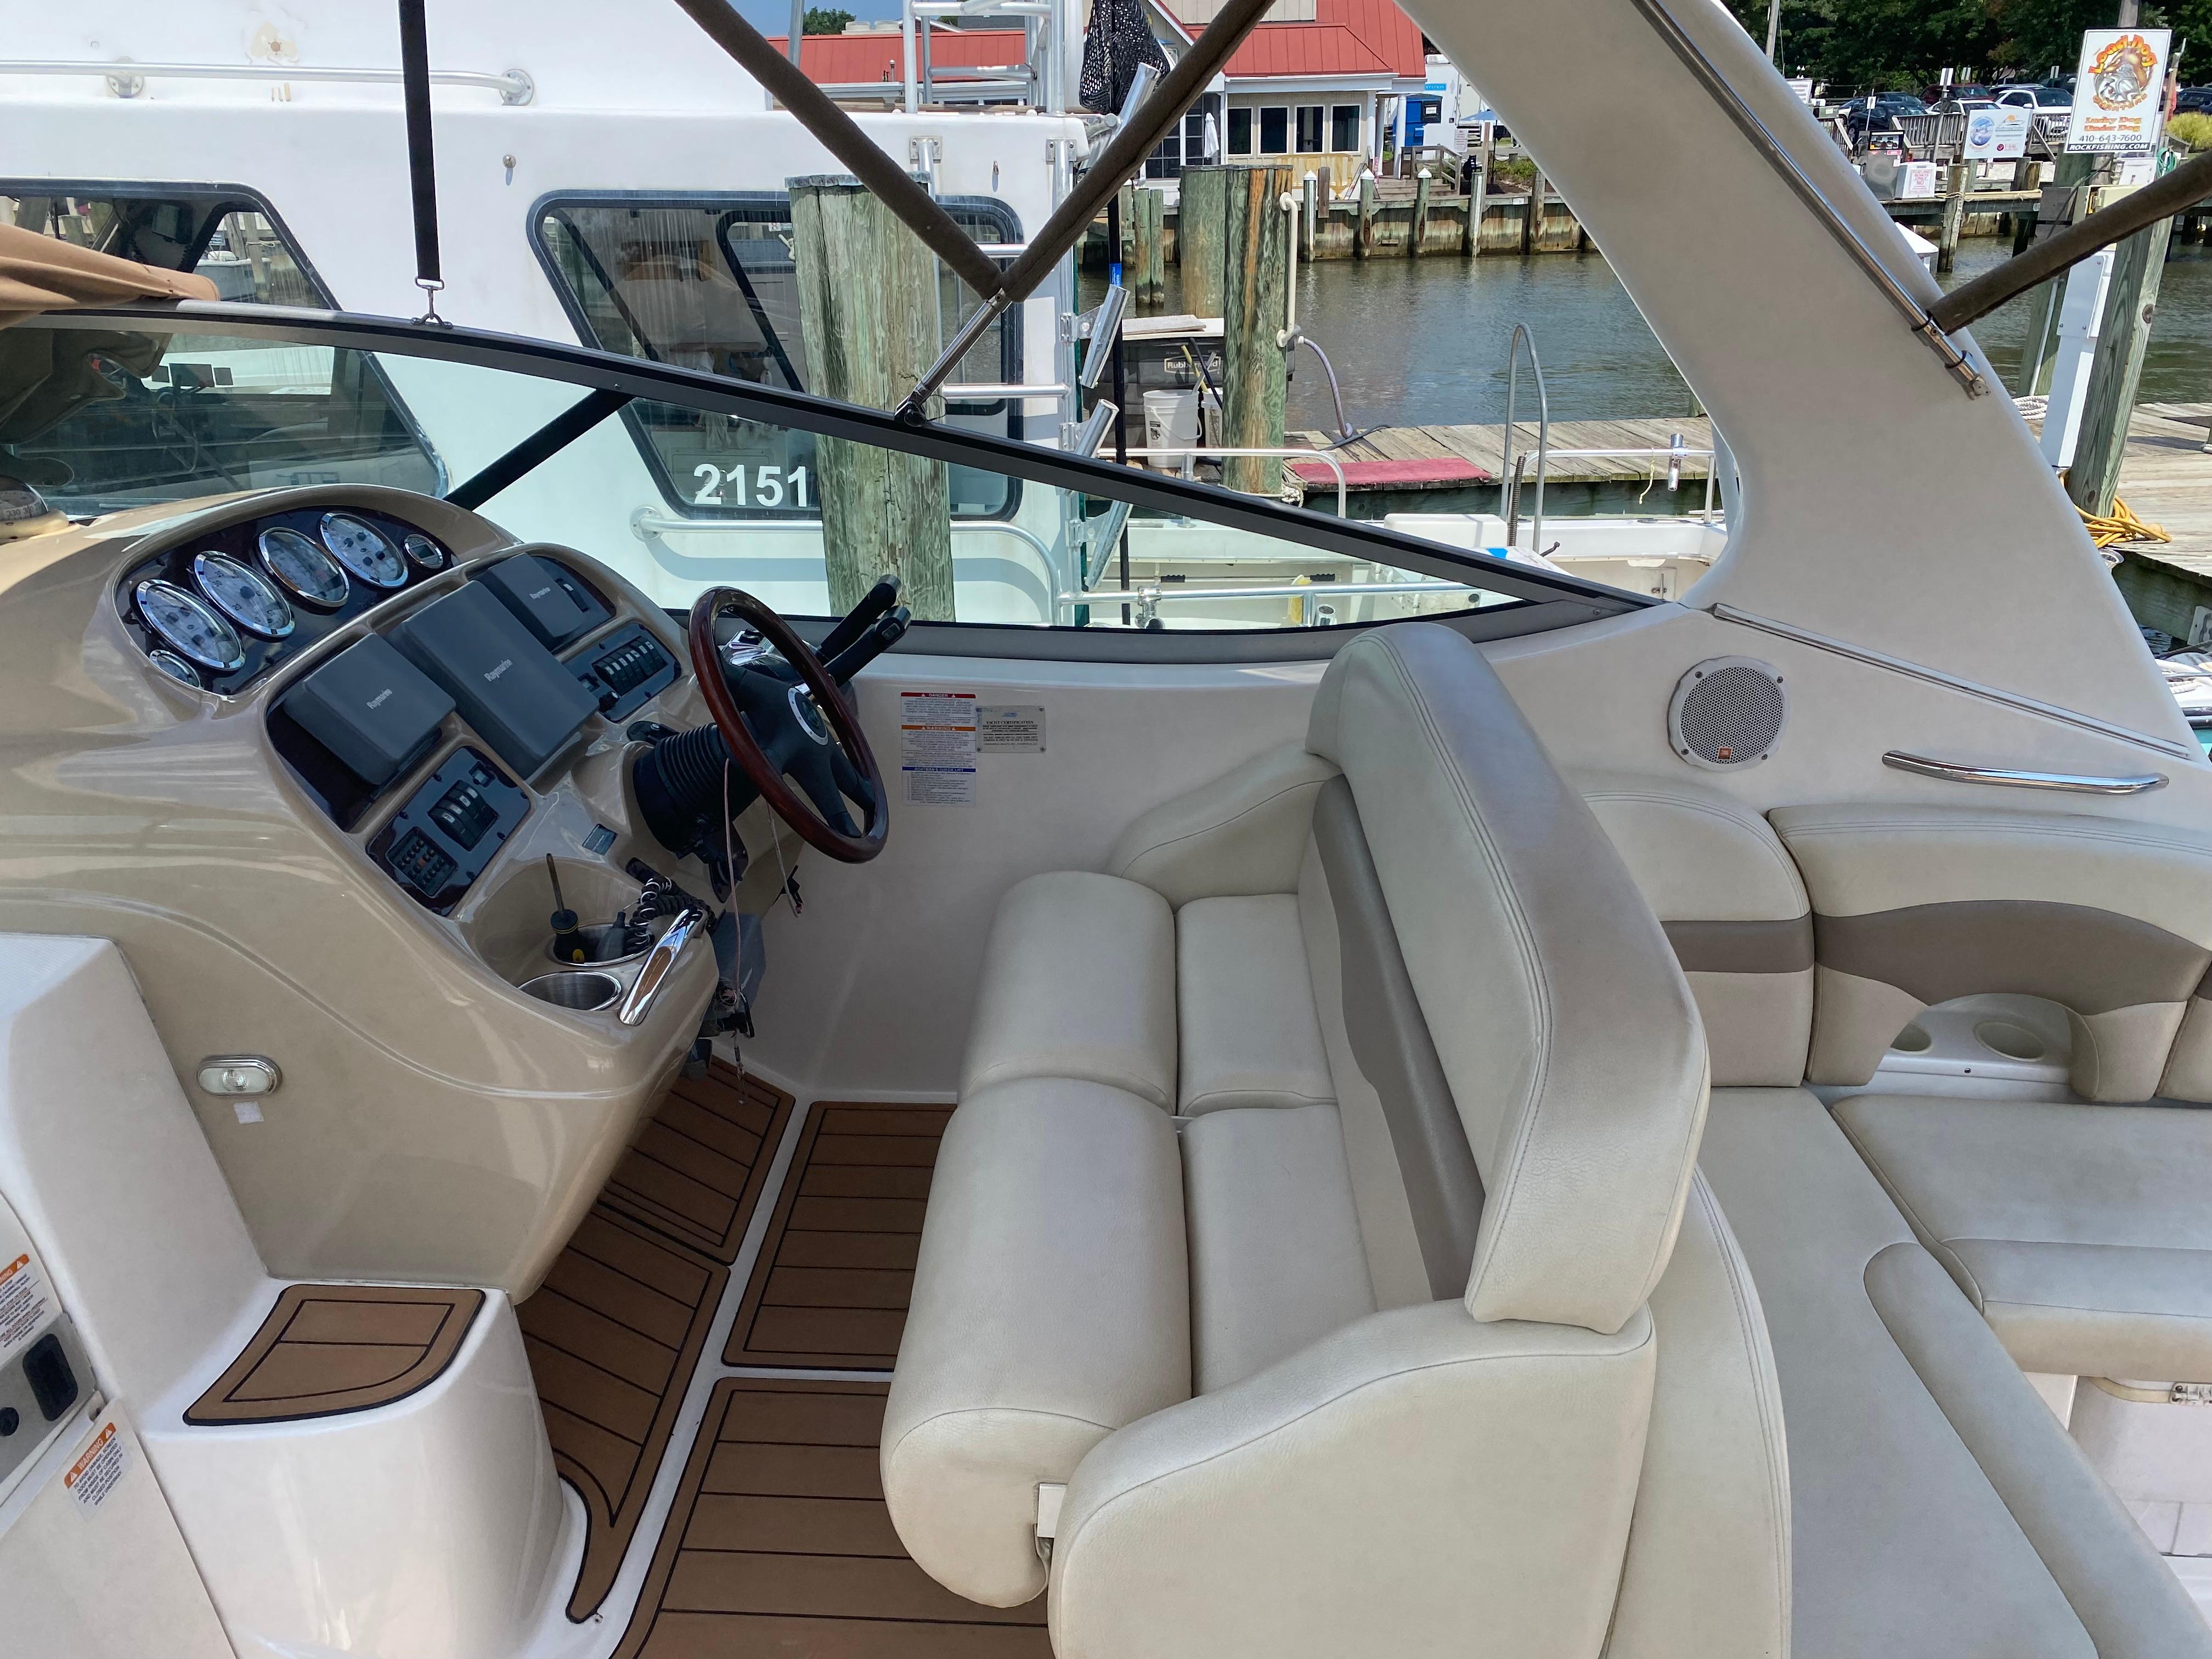 Whisper II Yacht Brokers of Annapolis